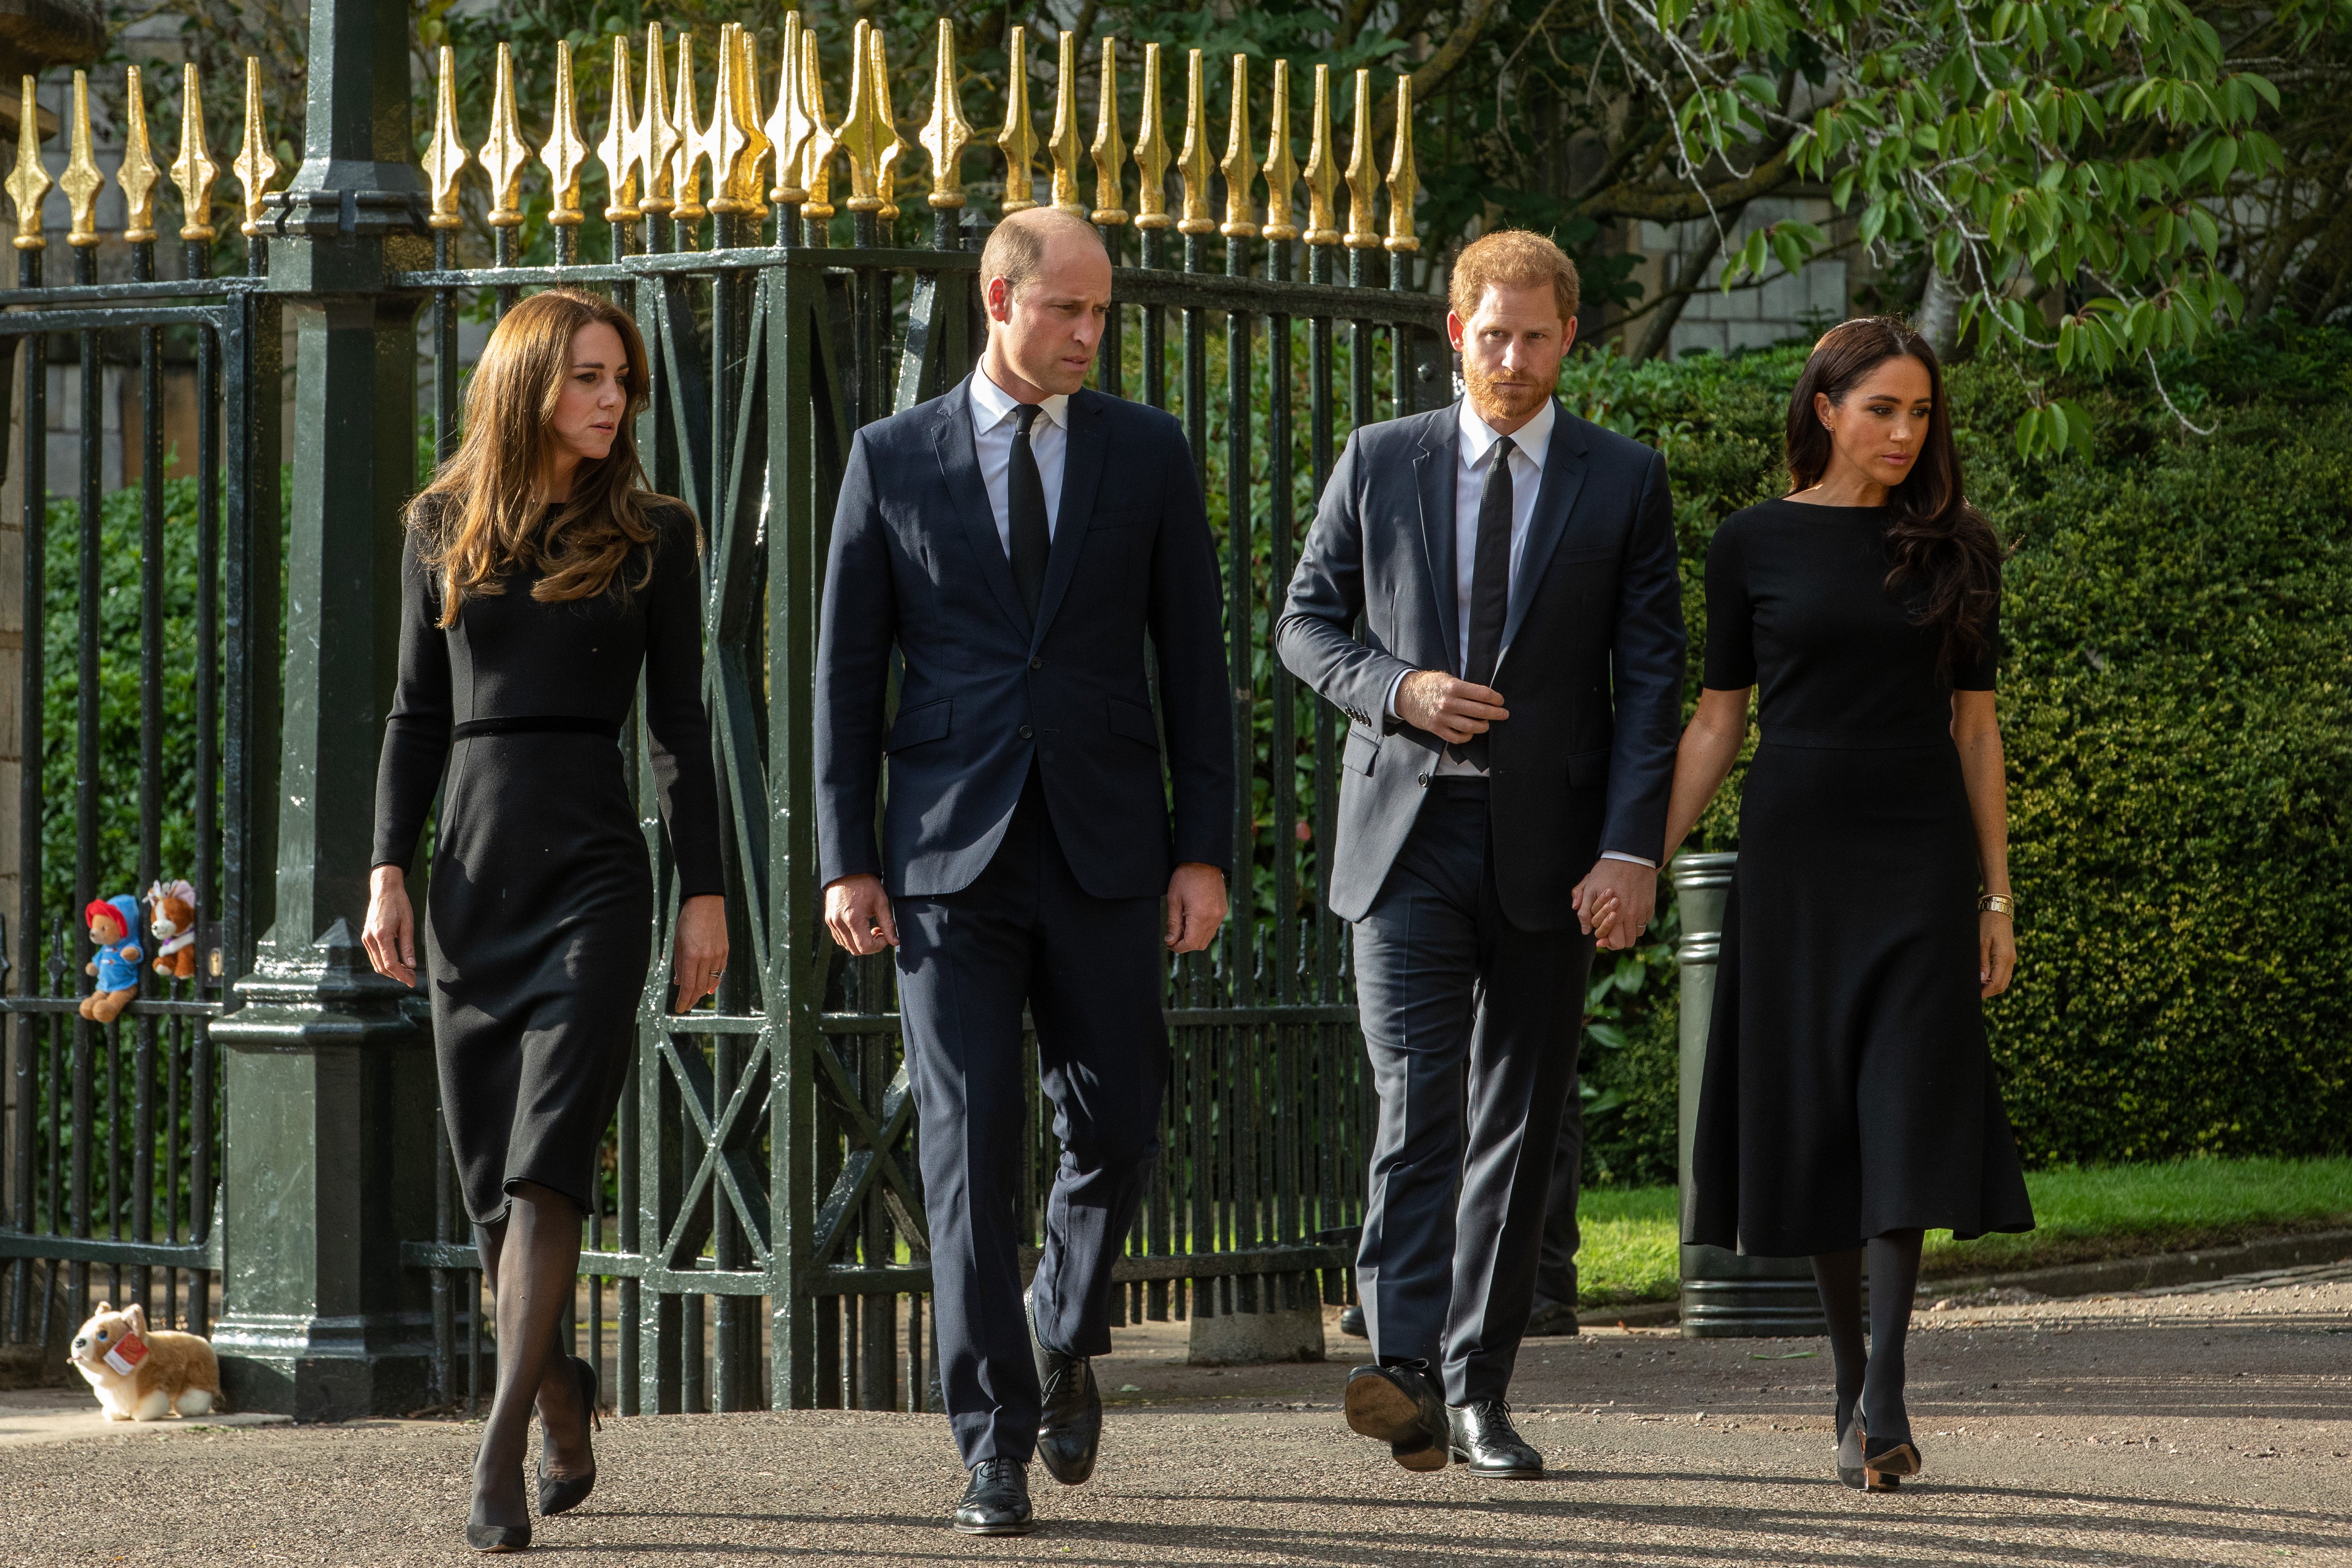 Prince William and Catherine, the new Prince and Princess of Wales, accompanied by Prince Harry and Meghan, the Duke and Duchess of Sussex, arrive to view floral tributes to Queen Elizabeth II laid outside Cambridge Gate at Windsor Castle on 10th September 2022 in Windsor, United Kingdom | Source: Getty Images